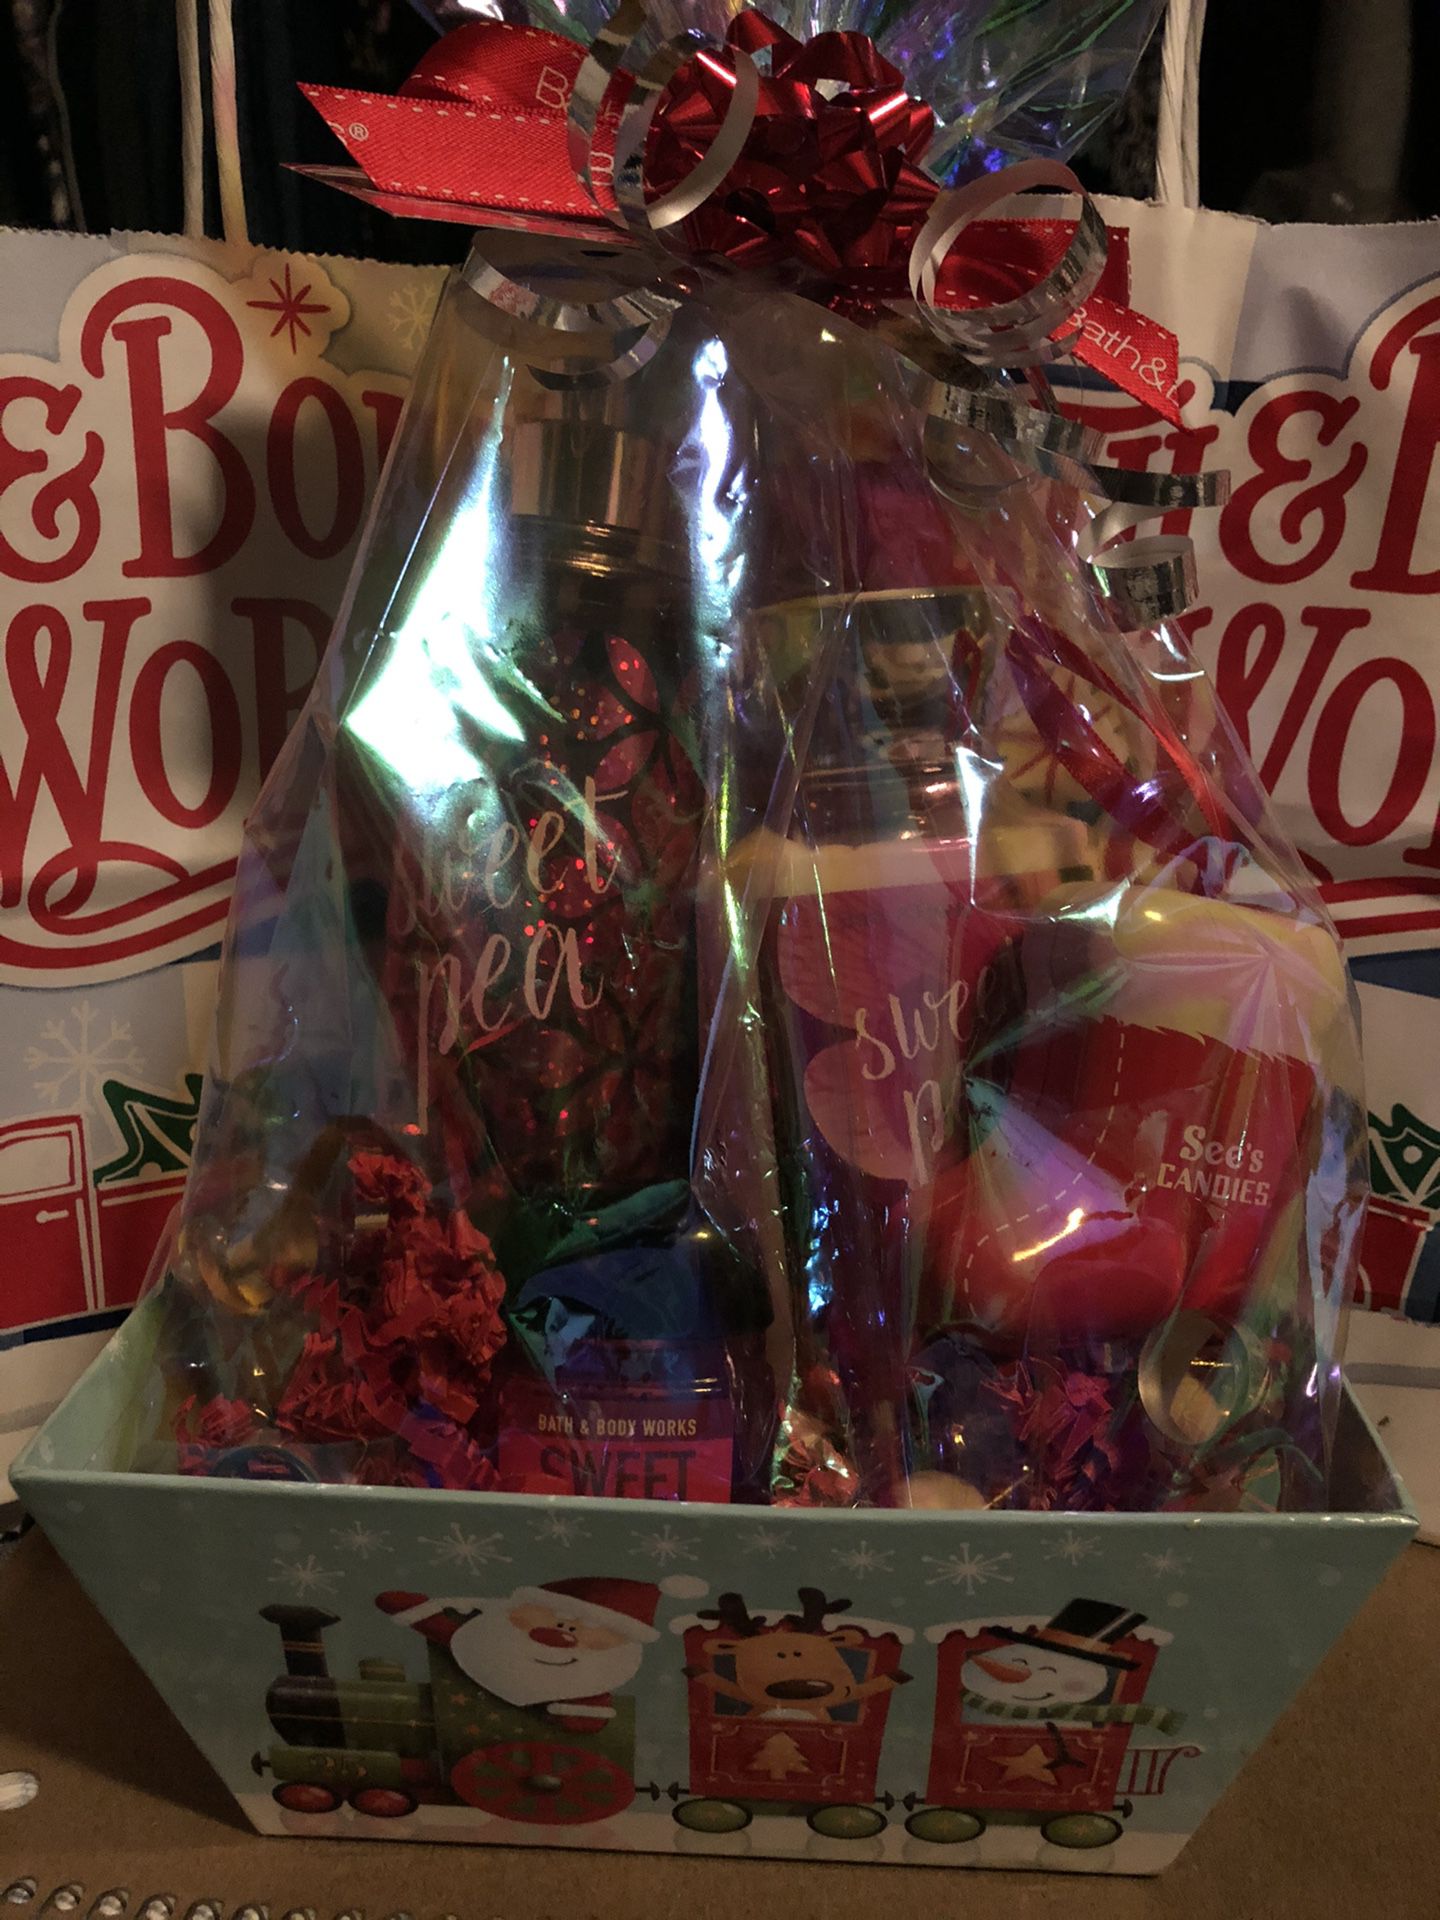 Need A Gift For The Holiday’s...Reasonably Priced And Gift Wrapped...Sweet Pea Fine Fragrance, Hand Lotion, Hand Gel Sanitizer, See’s Lollipop